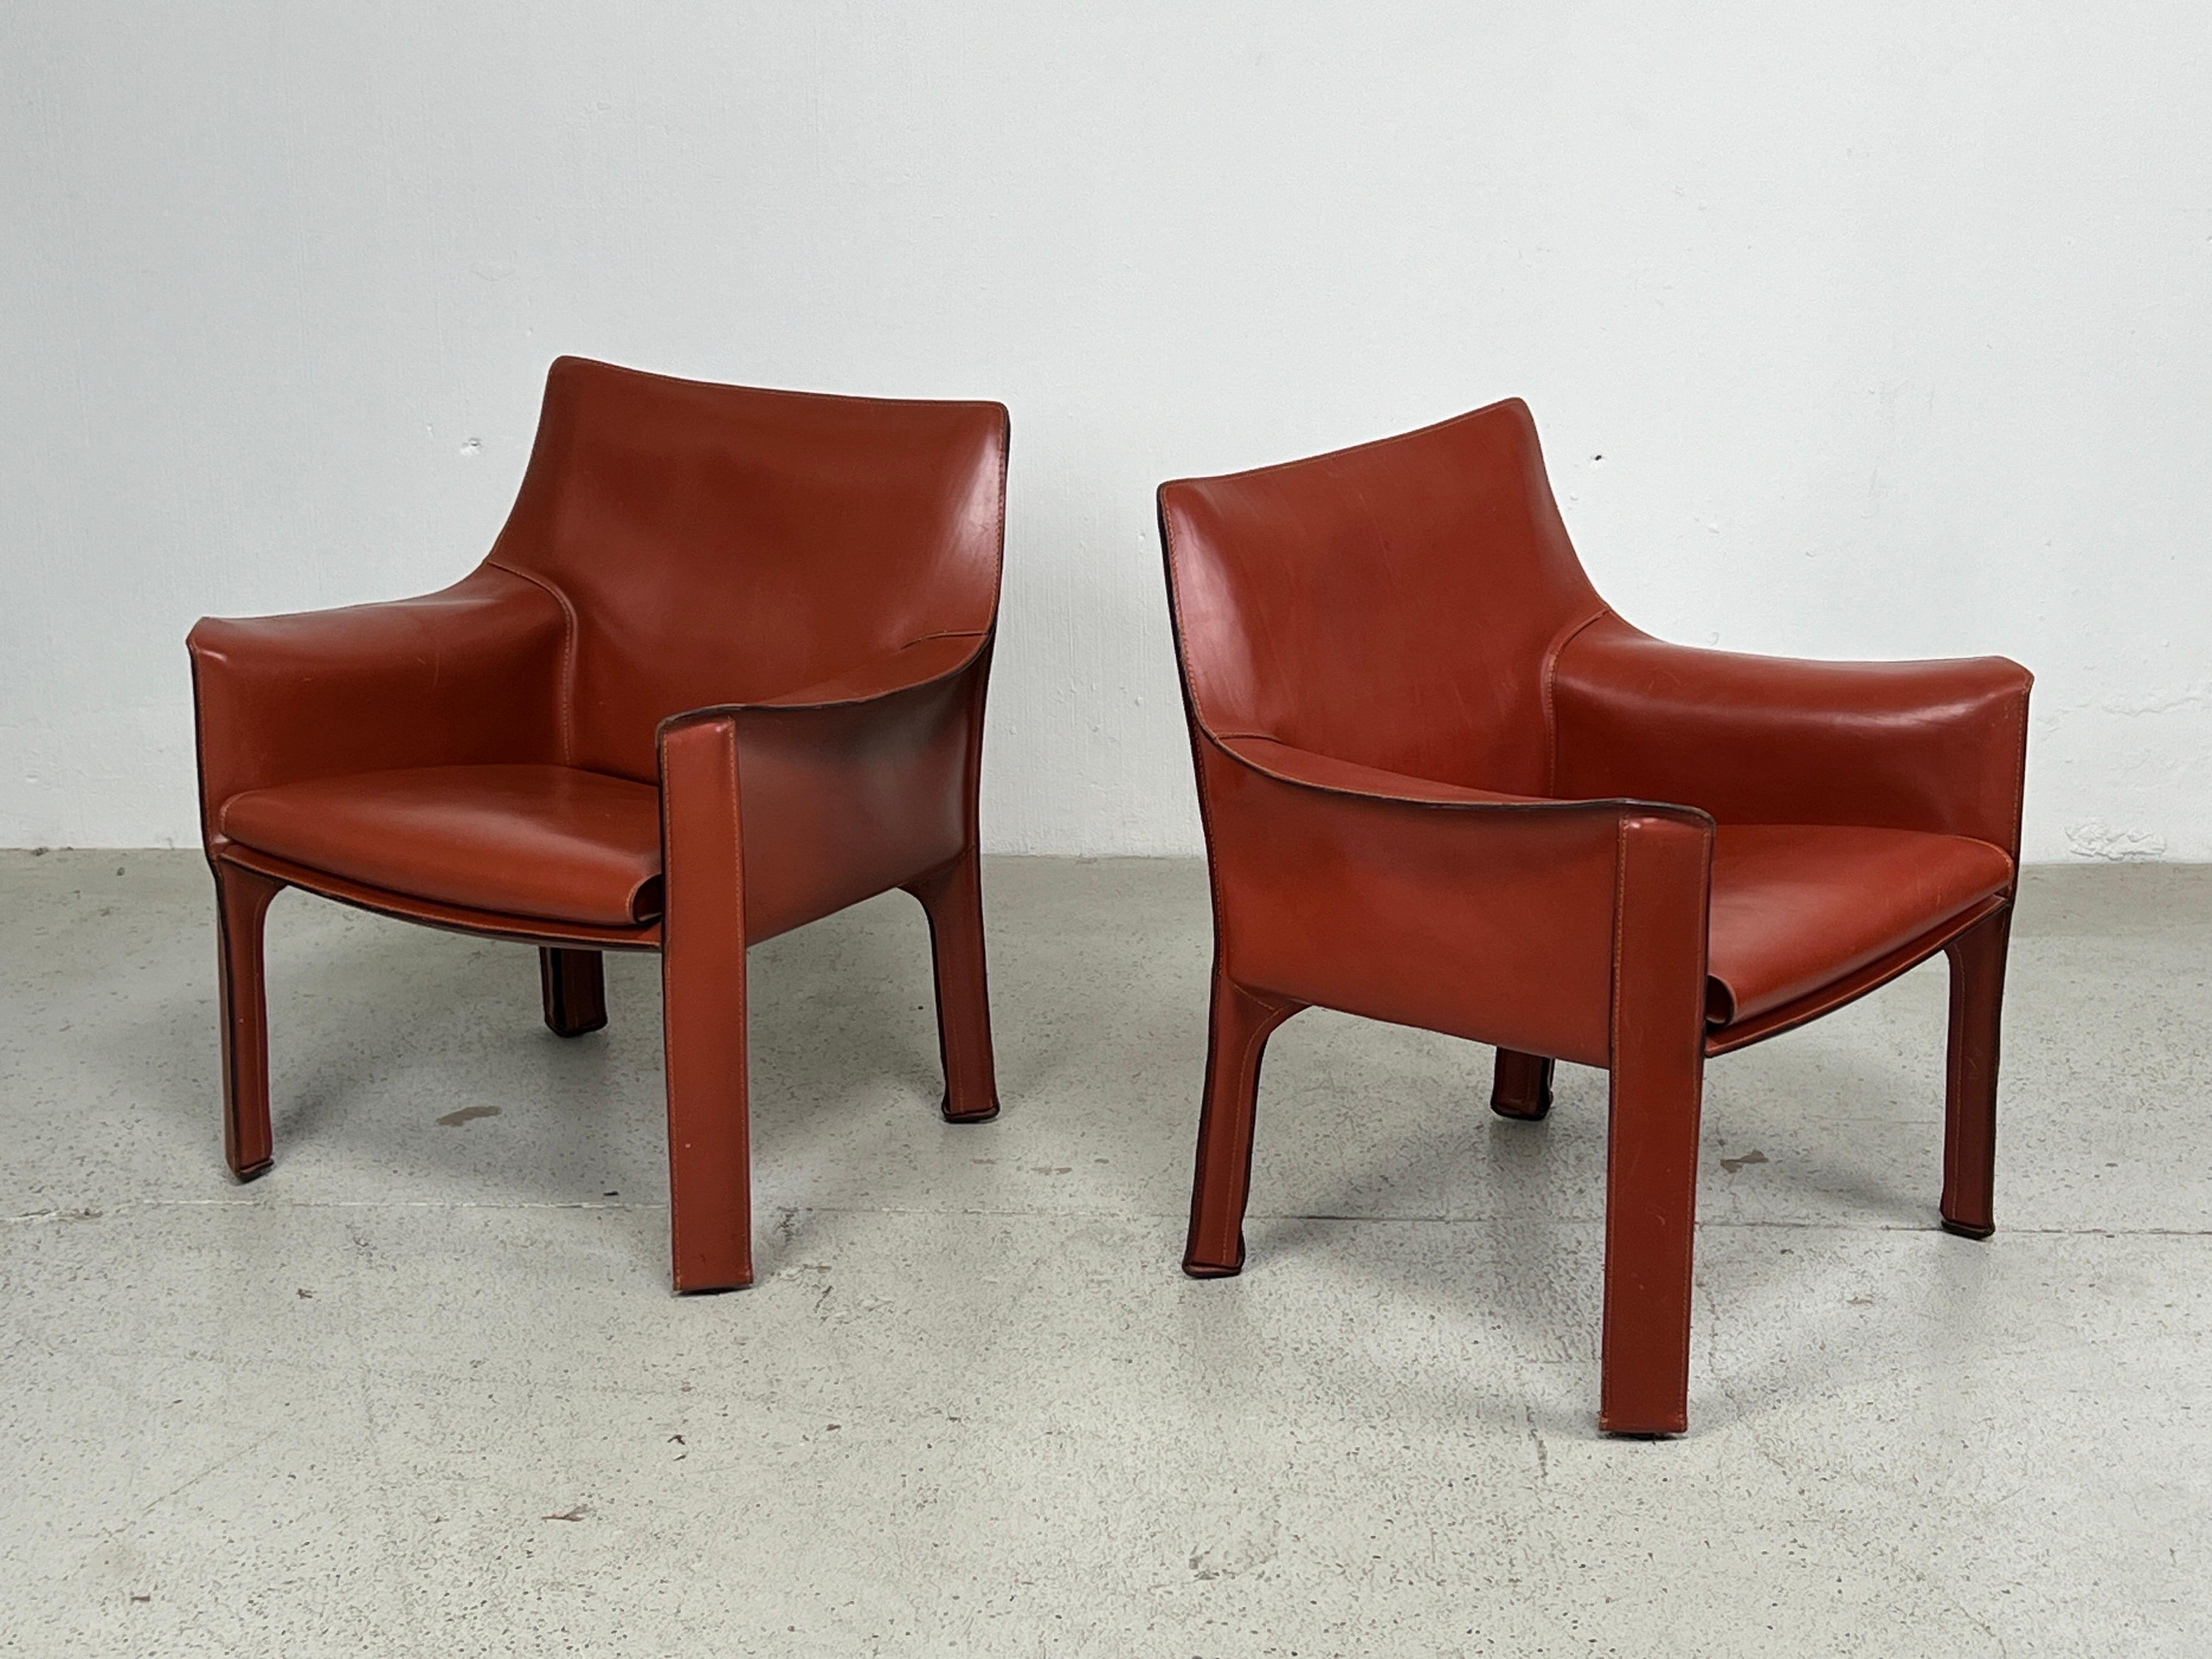 Pair of Mario Bellini for Cassina Cab 414 lounge chairs in China red/Oxblood leather.